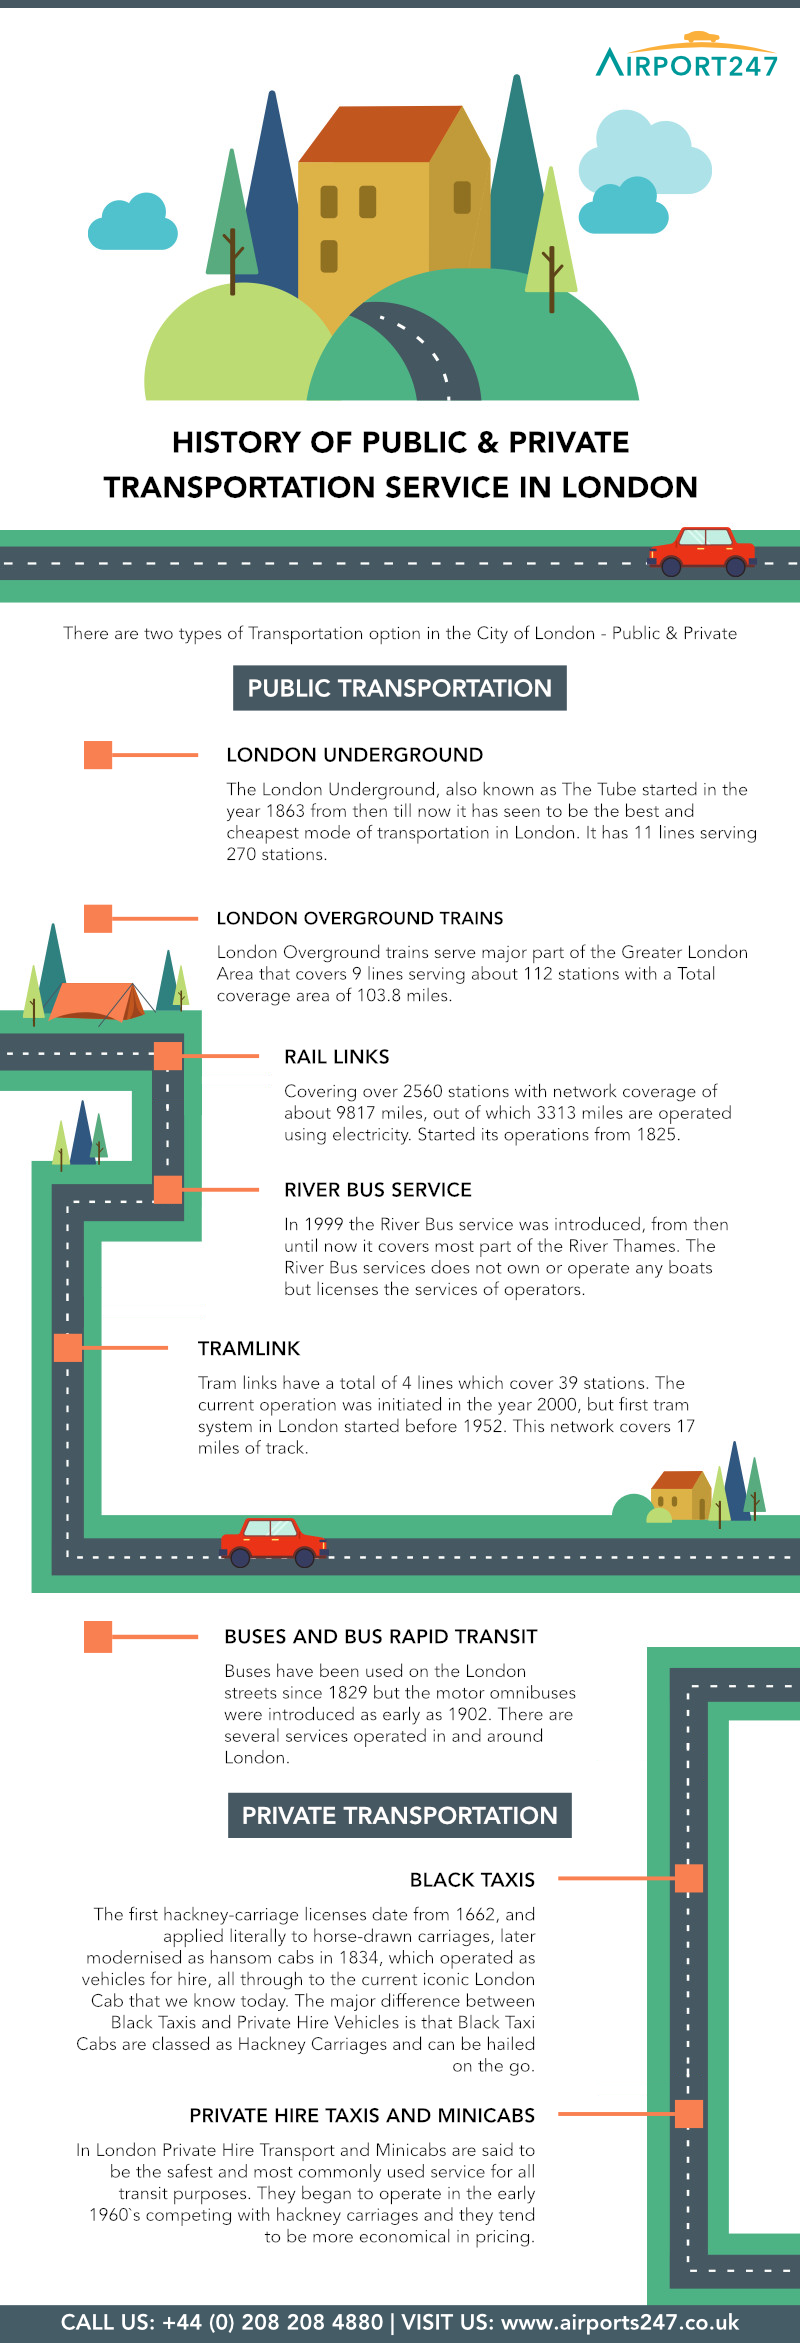 History of Public and Private Transportation Service in London